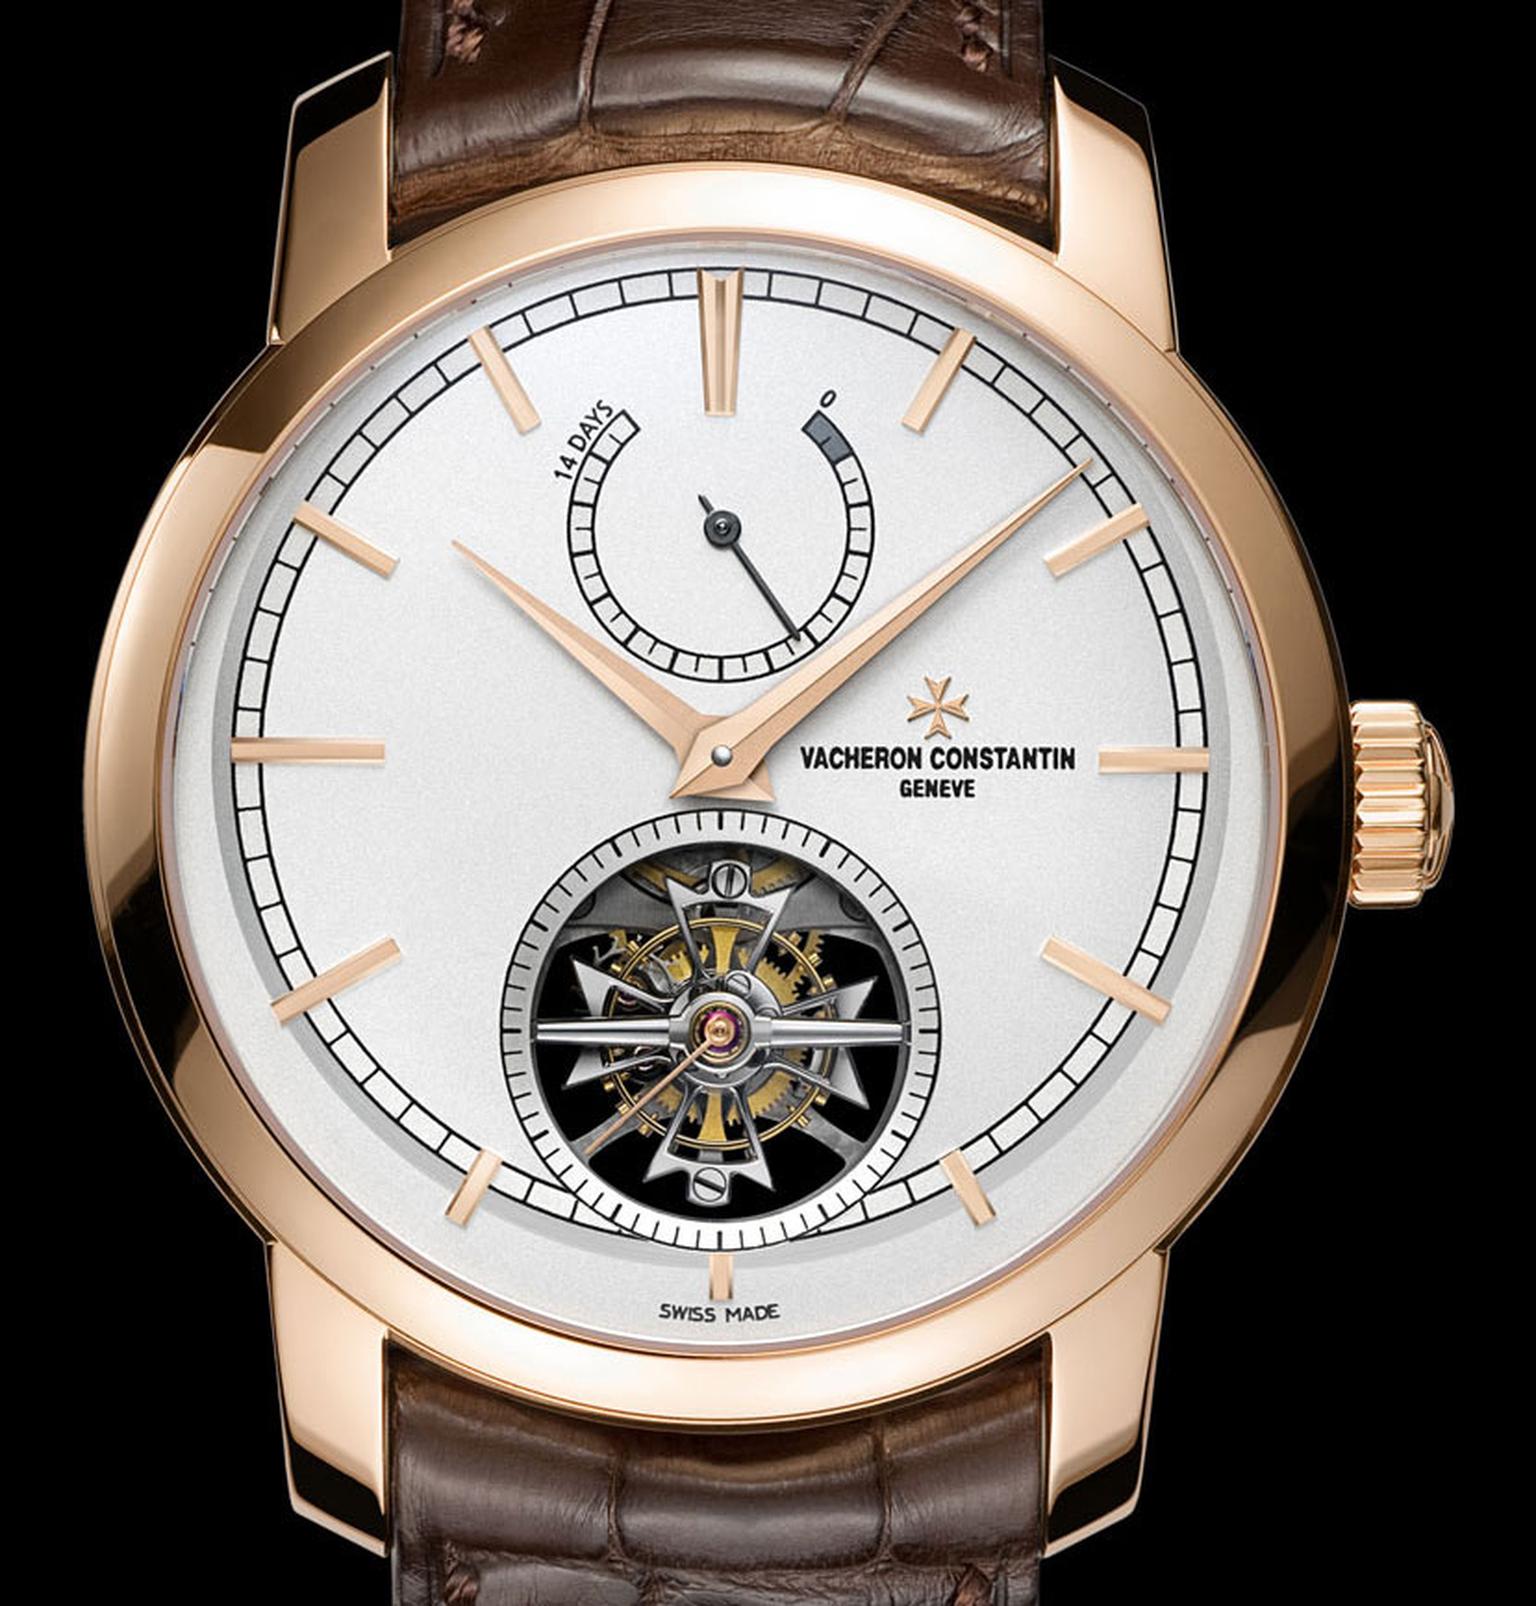 Vacheron-Constantin-Patrimony-Traditionnelle-14-day-Tourbillon-pink-gold,-transparent-back-fitted-with-a-sapphire-crystal-and-brown-alligator-leather-strap